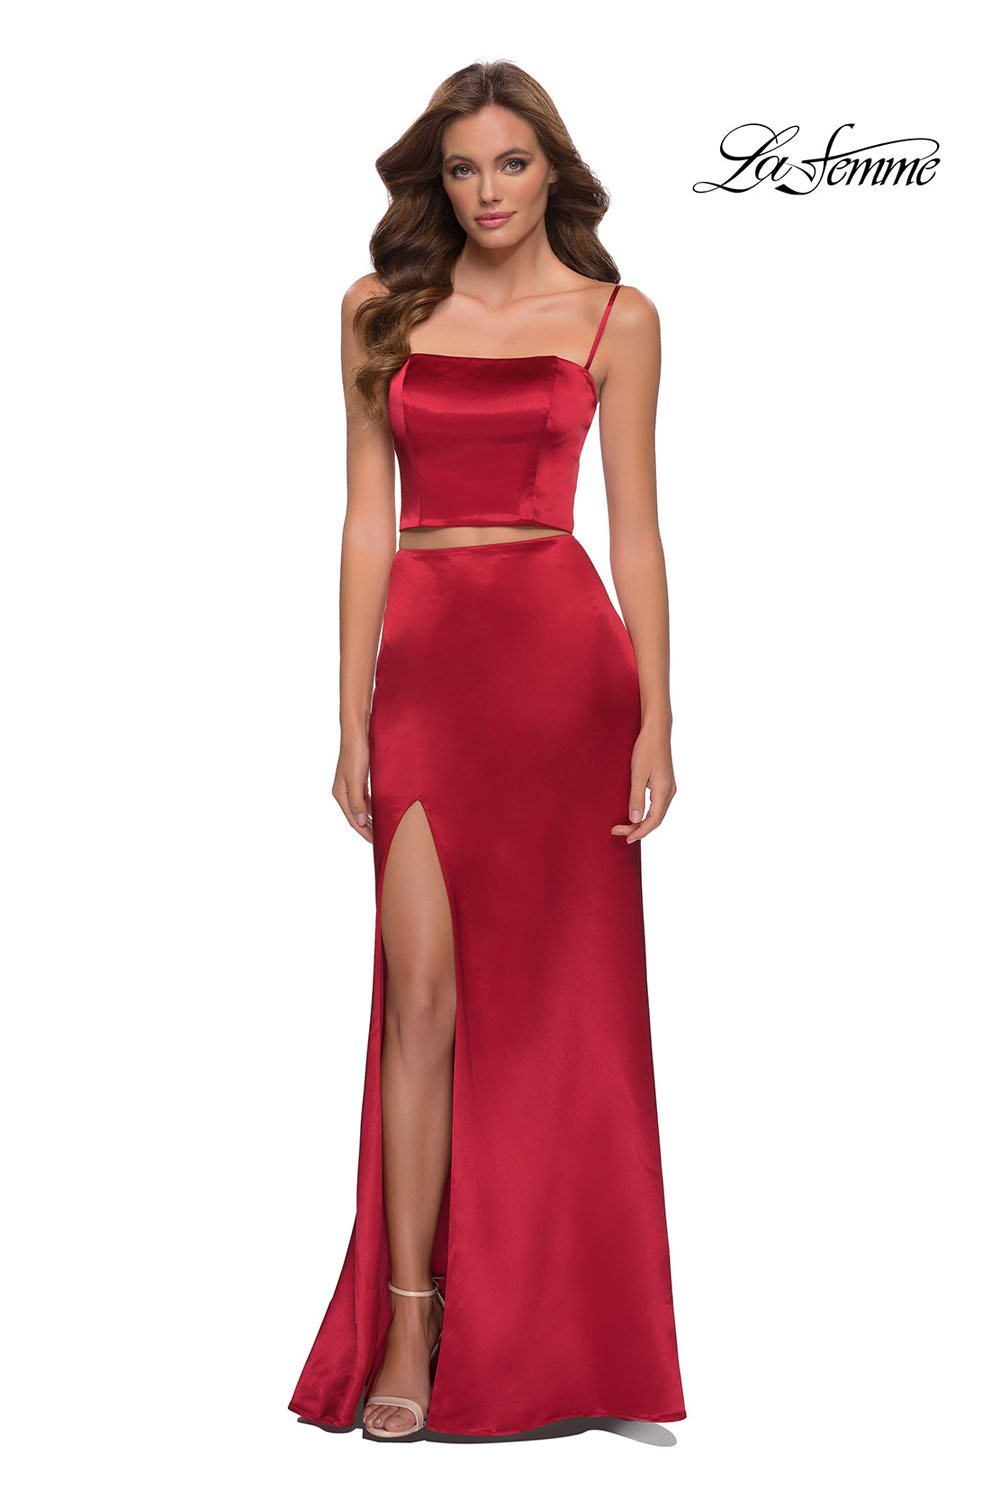 La Femme 29941 dress images in these colors: Black, Red.